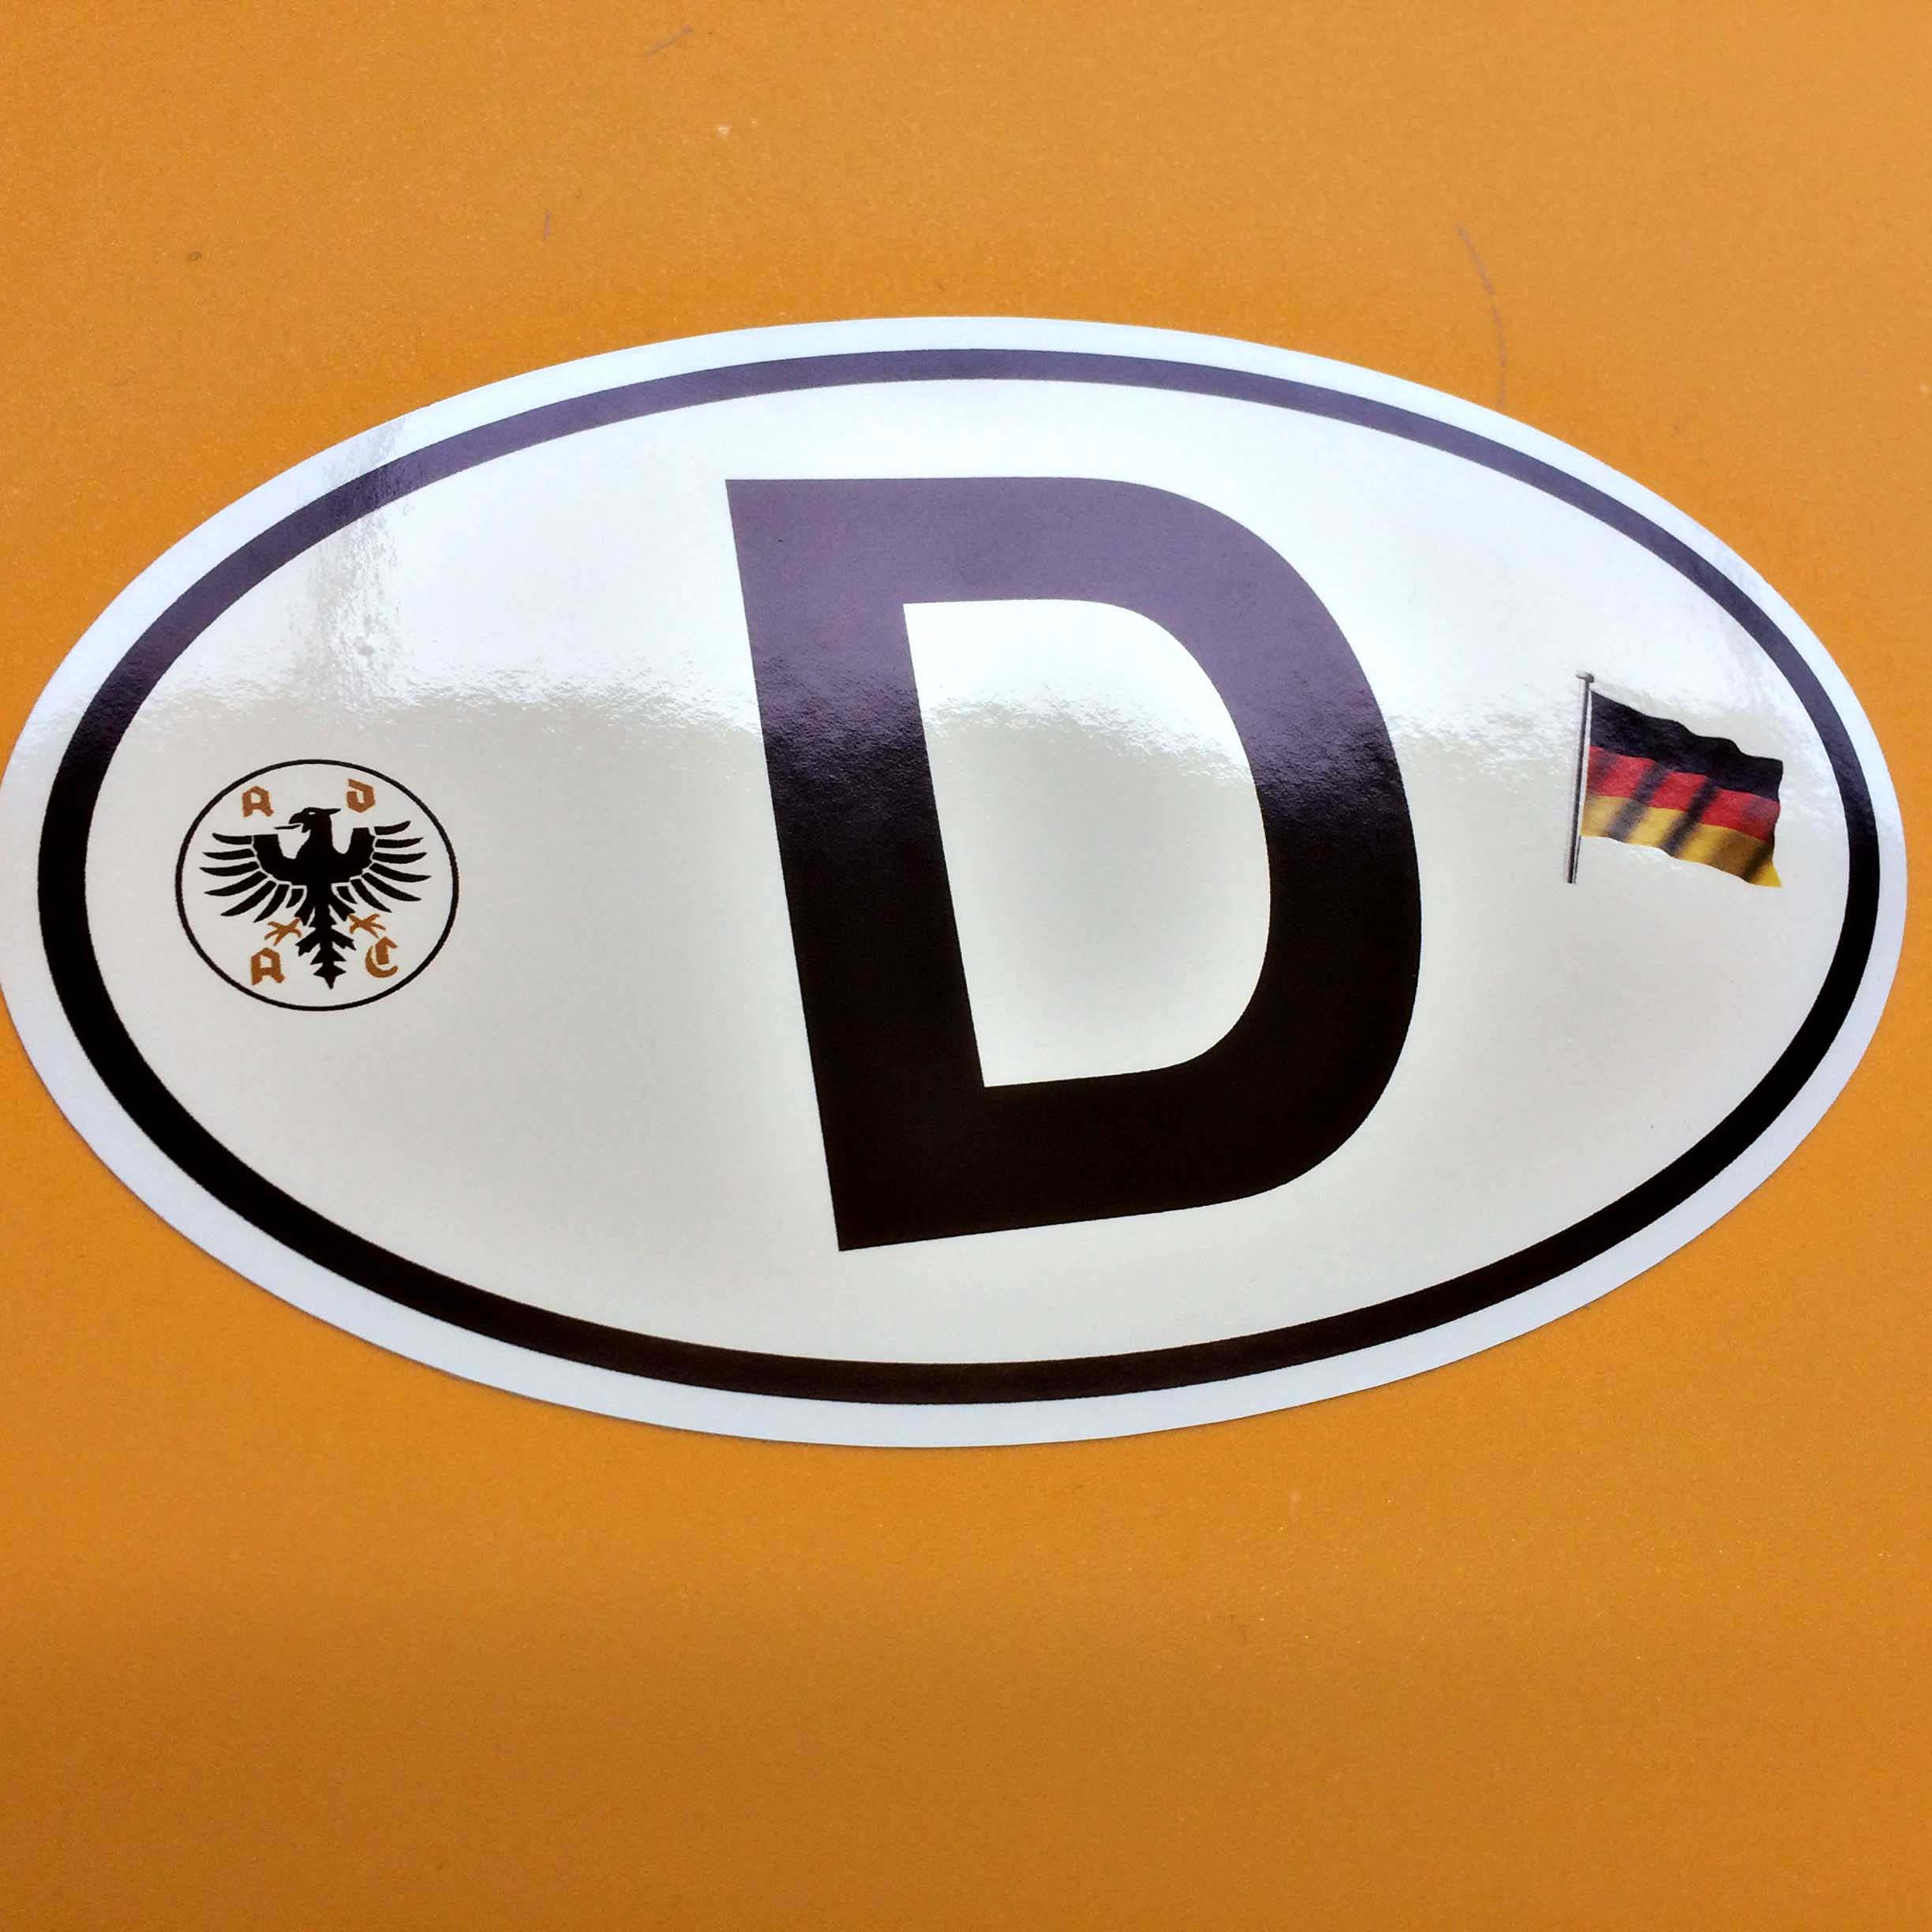 D FOR DEUTSCHLAND GERMAN STICKER. D in bold black lettering on a white oval sticker with a black border. Either side of the letter D are the German flag, three horizontal bands of black, red and gold and the ADAC, the German Automobile Club logo, a black eagle surrounded by gold letters ADAC.